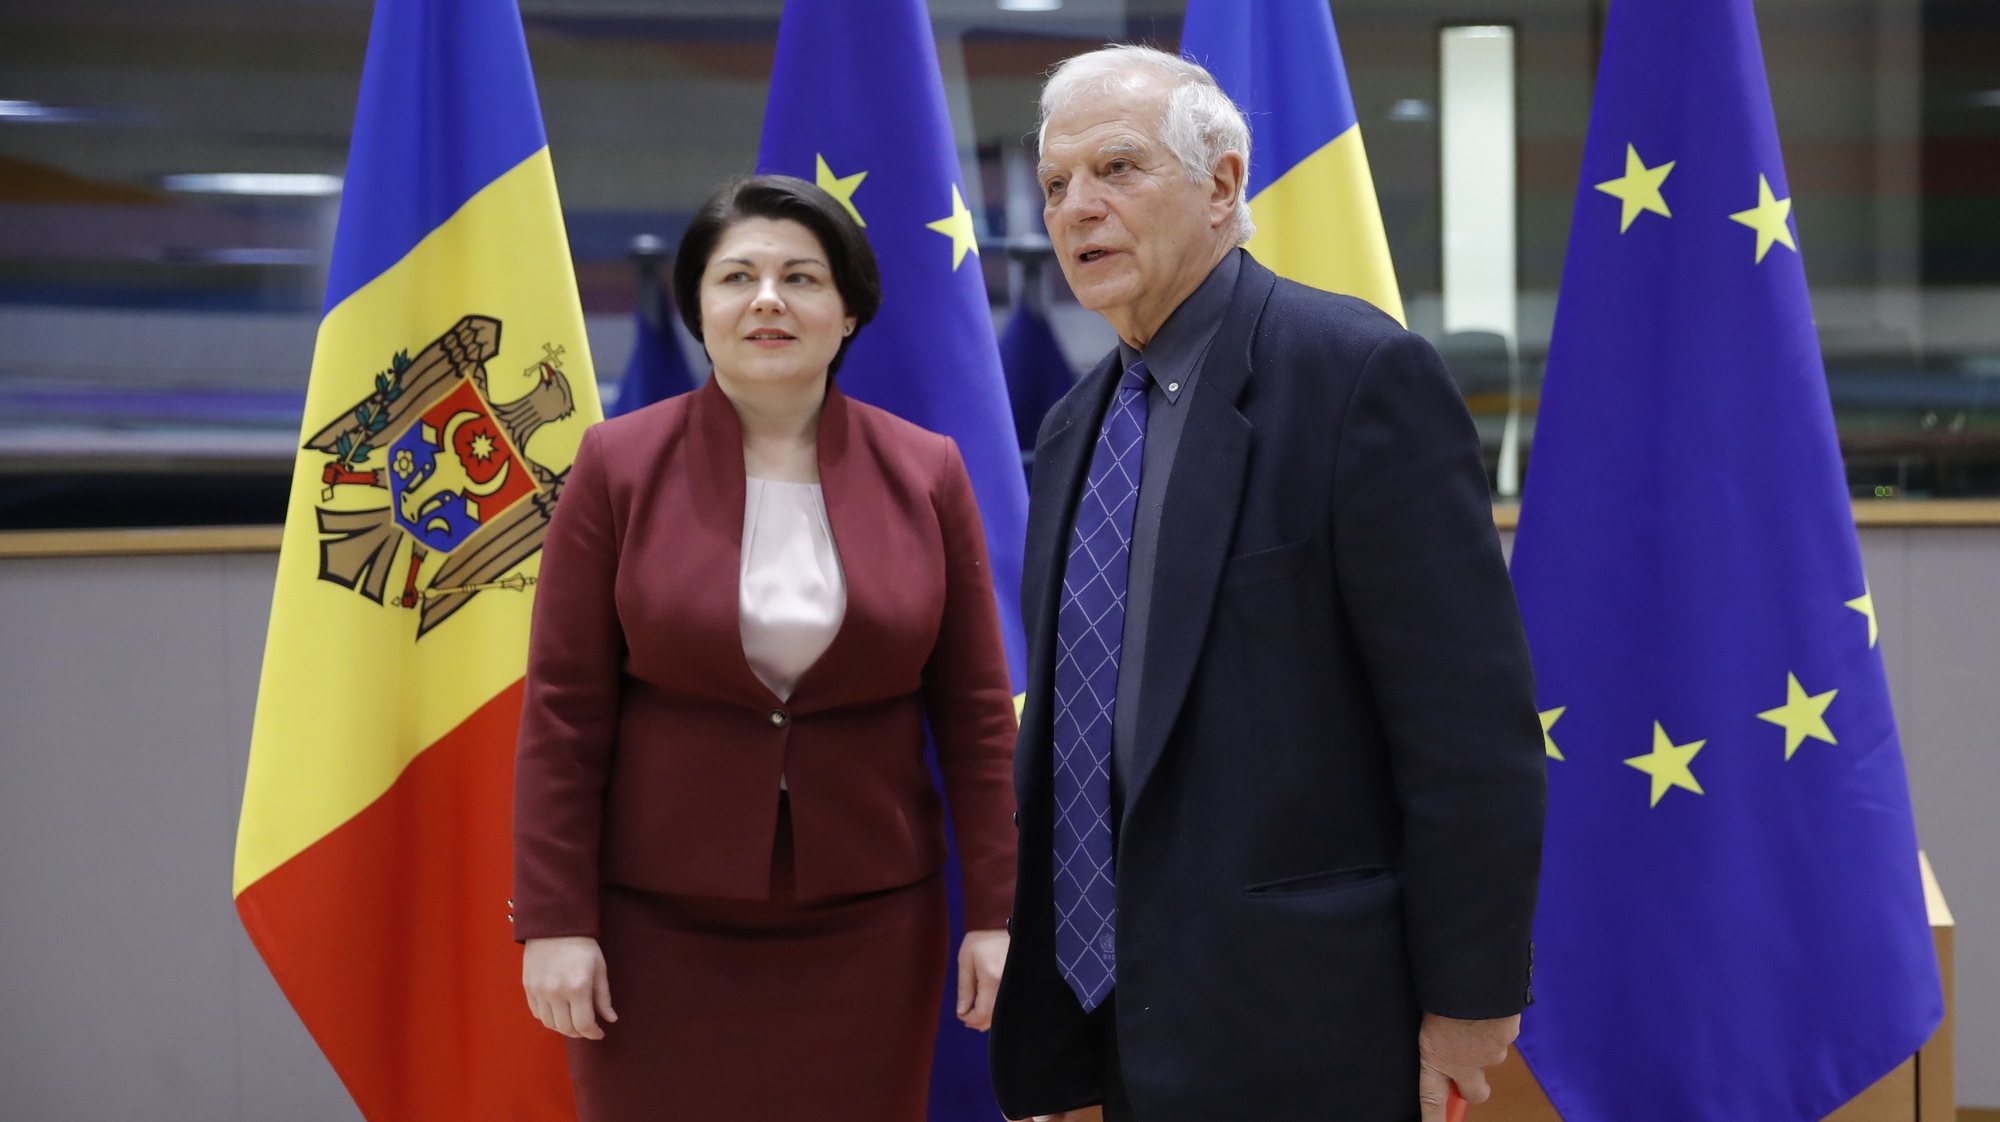 epa10452367 Moldova&#039;s Prime Minister Natalia Gavrilita (L) and High Representative of the European Union for Foreign Affairs and Security Policy Josep Borrell pose for a photo ahead of an EU-Republic of Moldova Association Council in Brussels, Belgium, 07 February 2022. It is the first EU-Republic of Moldova Association Council since Moldova became an EU candidate country.  EPA/OLIVIER HOSLET